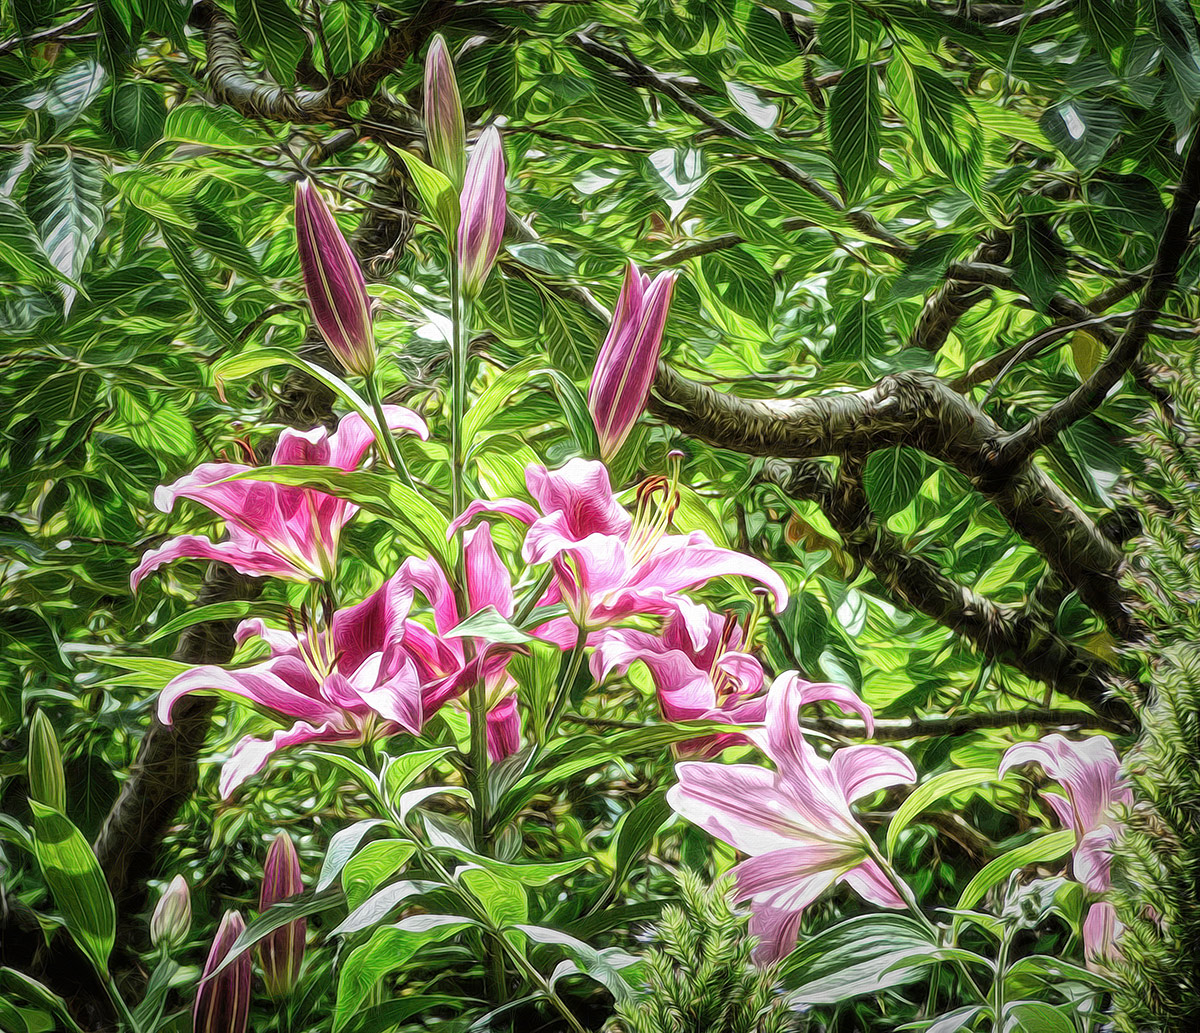 When the Scent of Lilies Pervades the  Summer Air